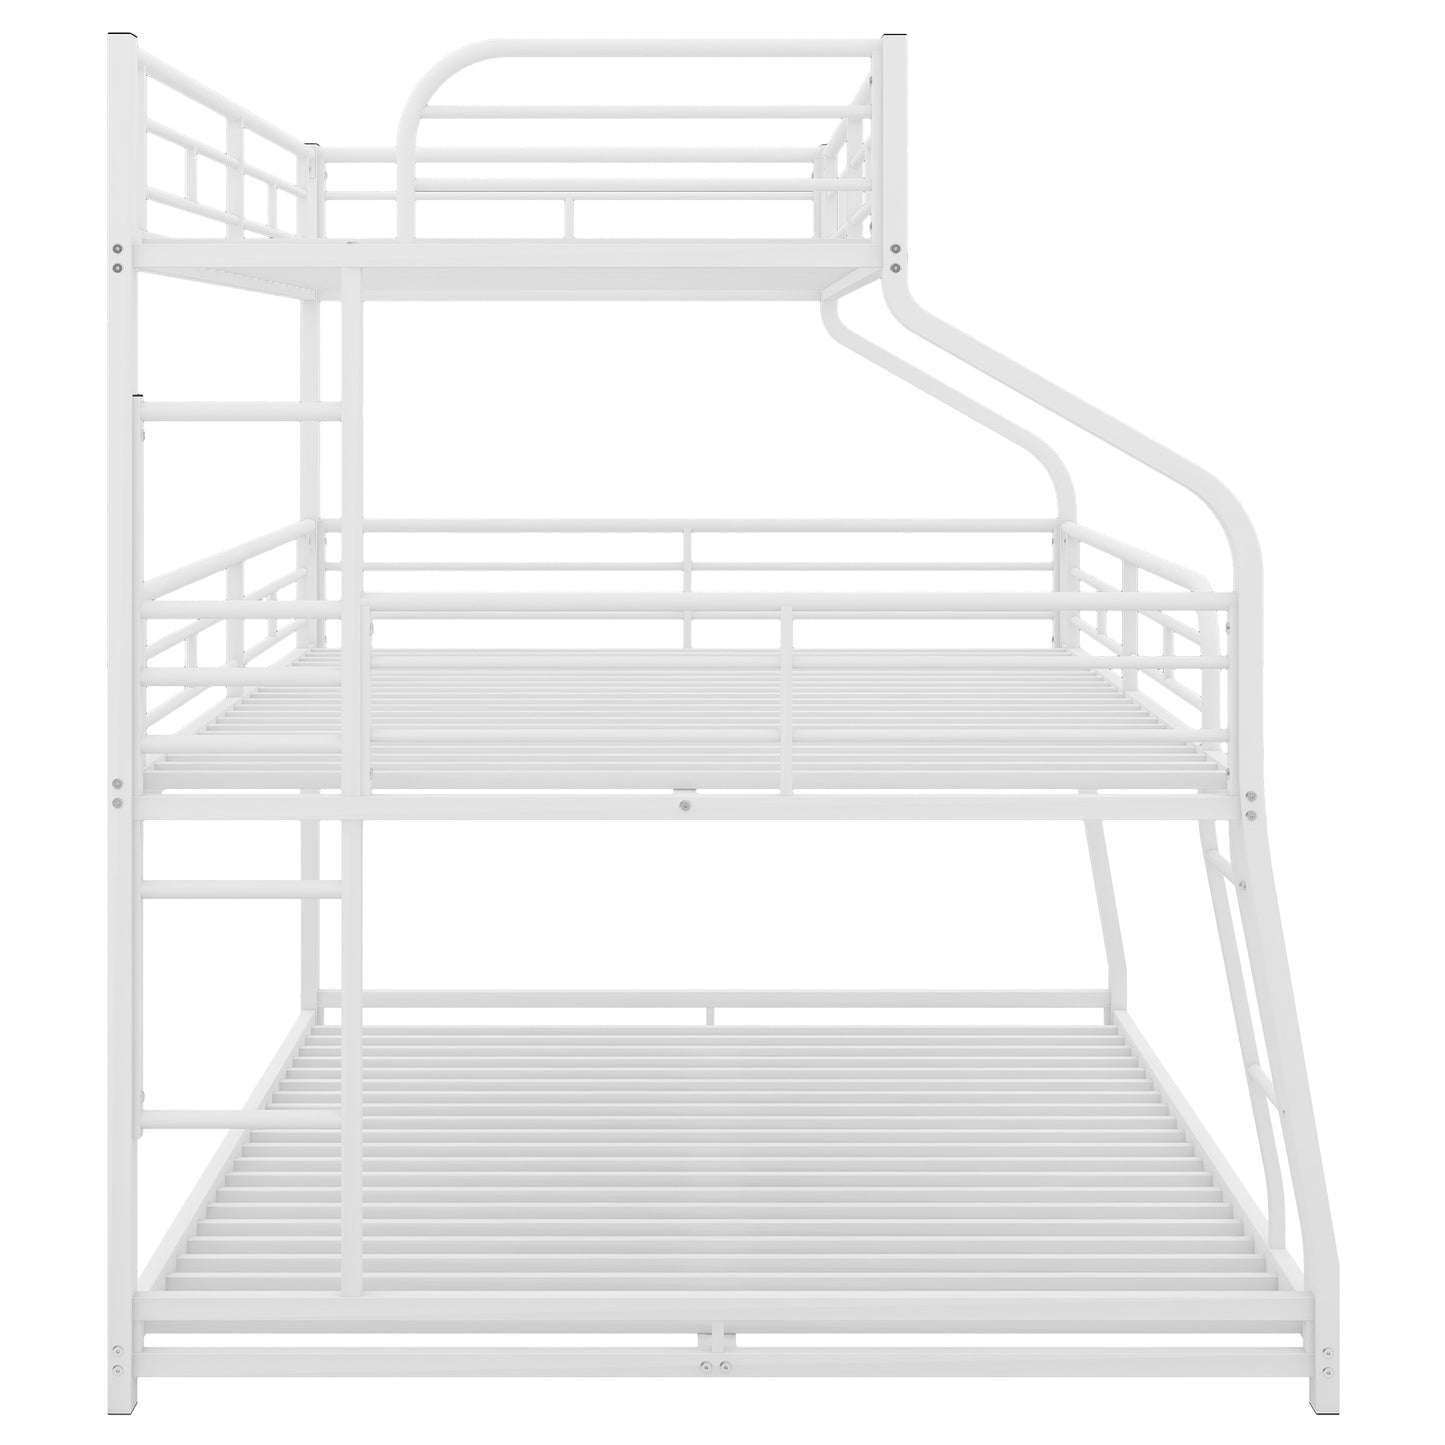 Twin XL/Full XL/Queen Triple Bunk Bed with Long and Short Ladder and Full-Length Guardrails,White